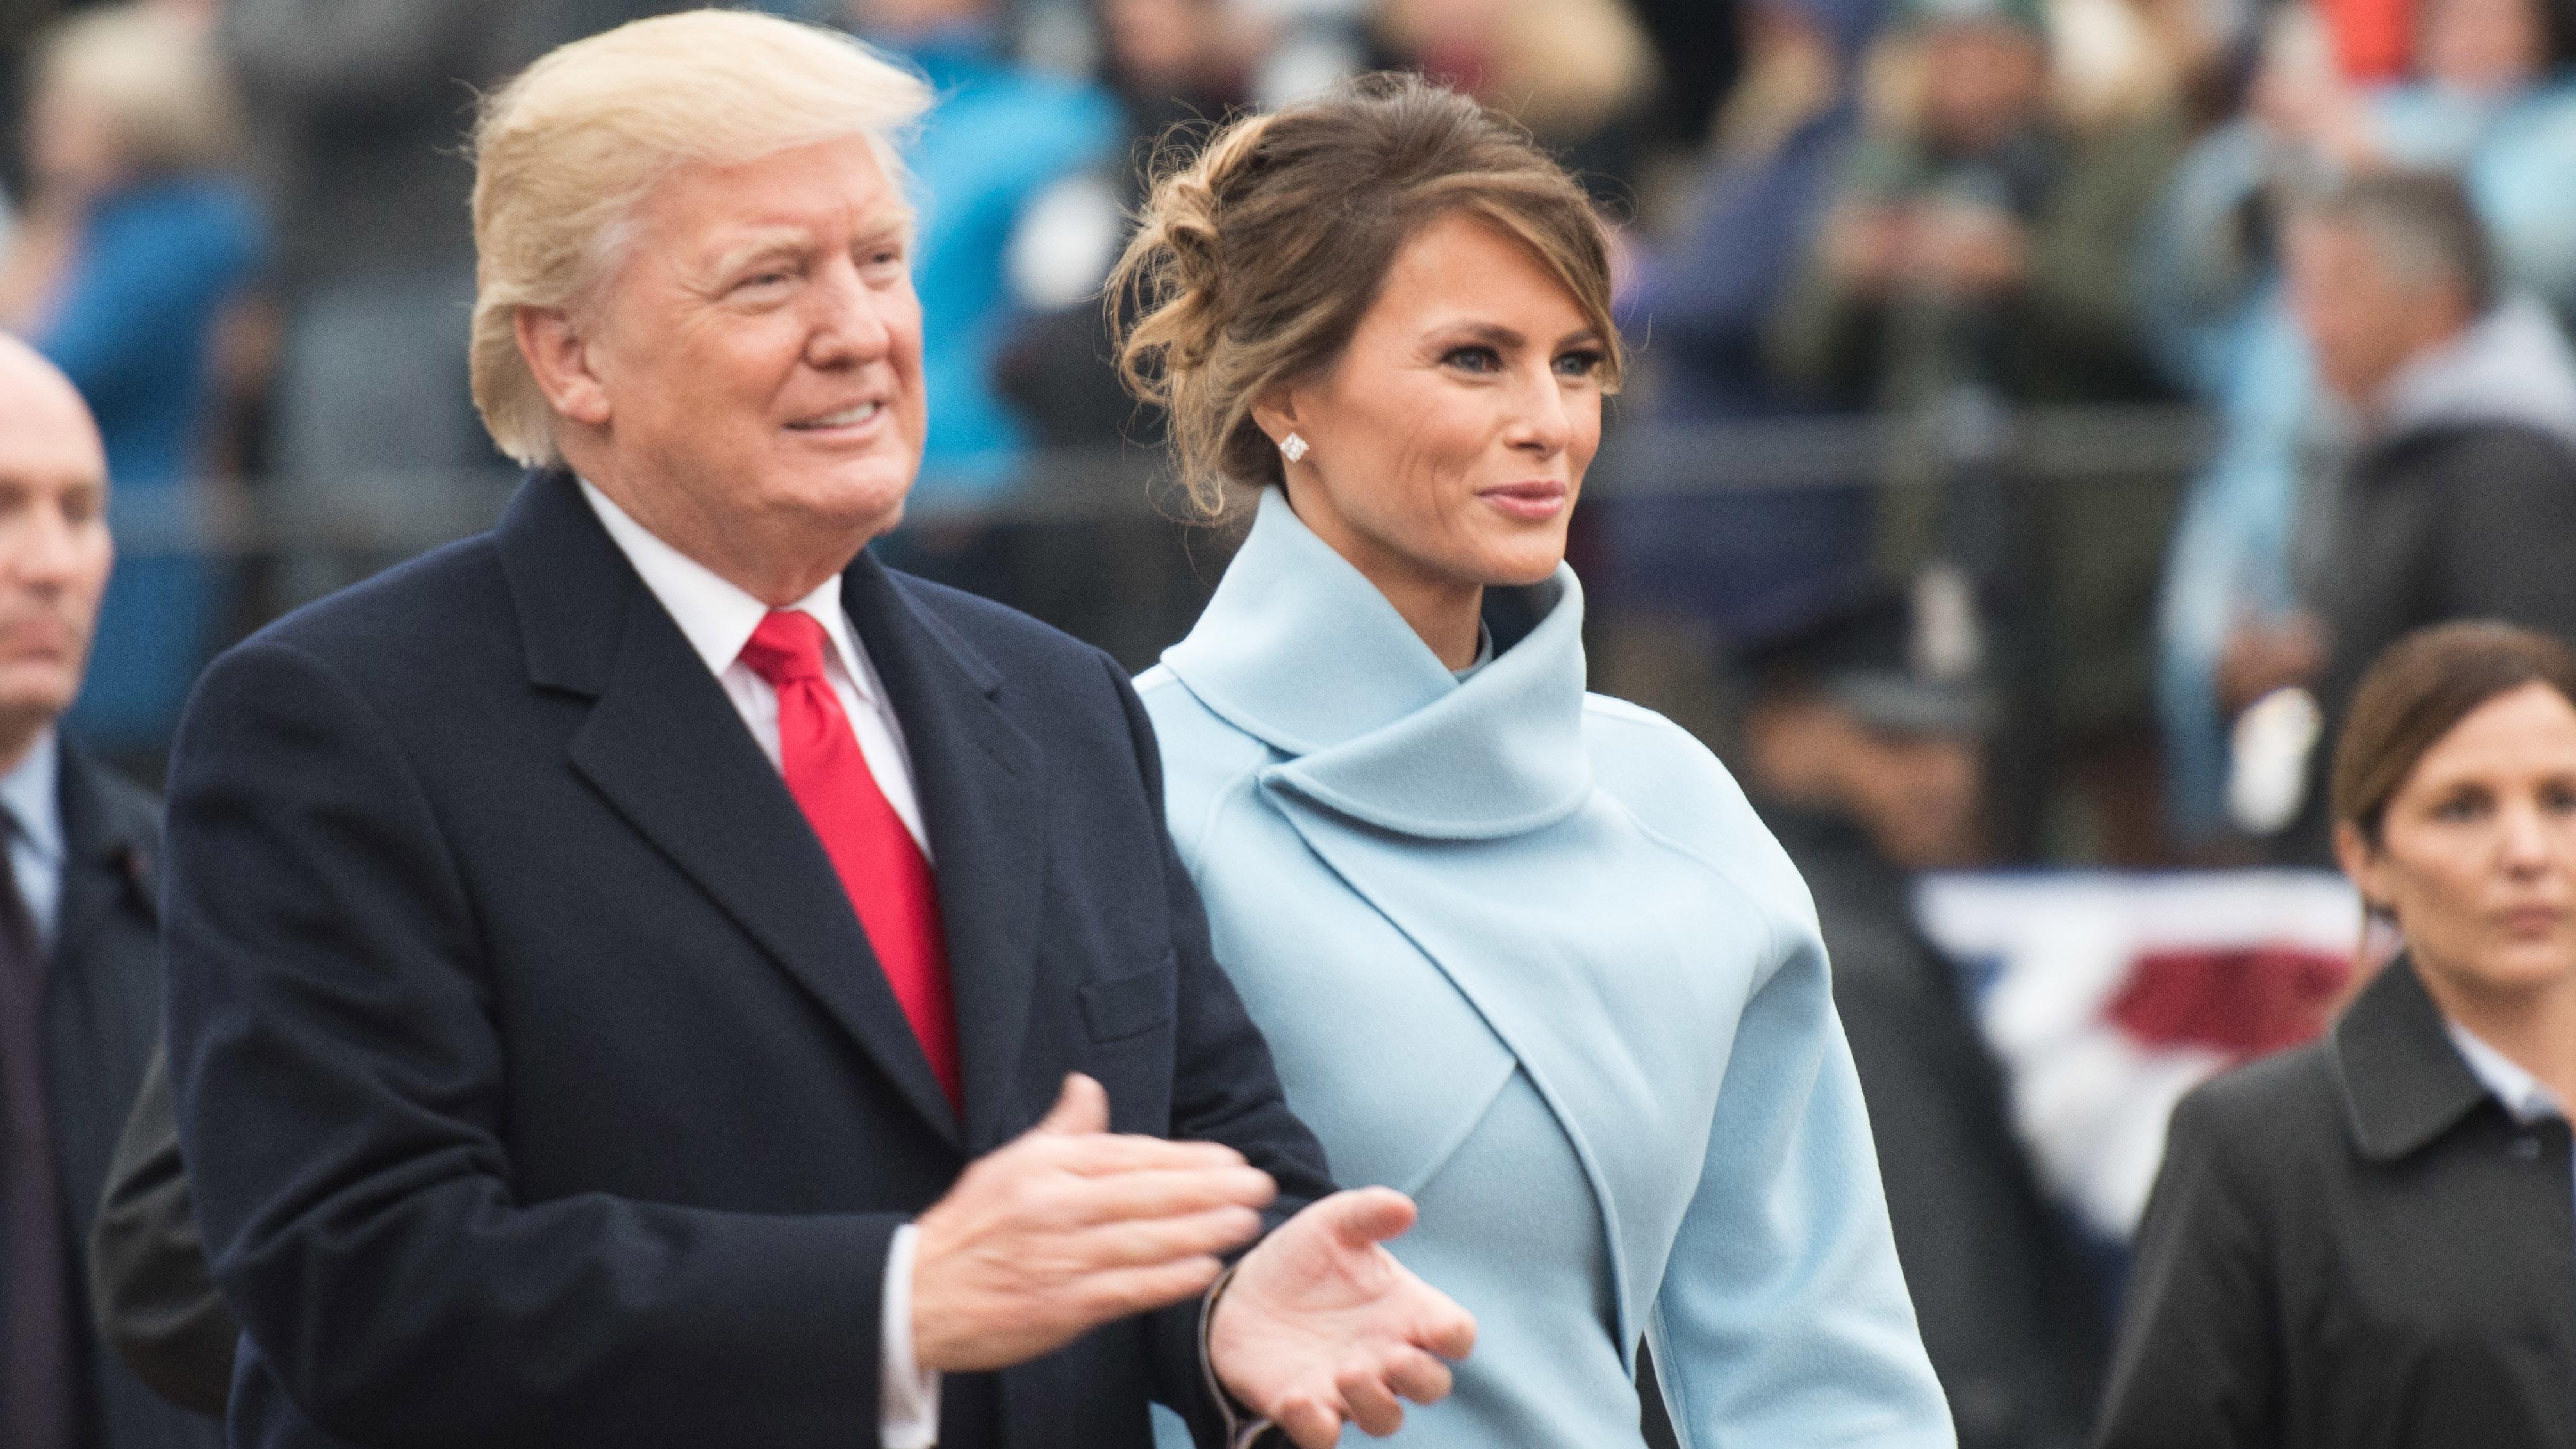 President Donald Trump and first lady Melania Trump at the 58th presidential inaugural parade in Washington D.C., on Jan. 20, 2017. (U.S. Army photo by Pvt. Gabriel Silva / Wikimedia Commons)